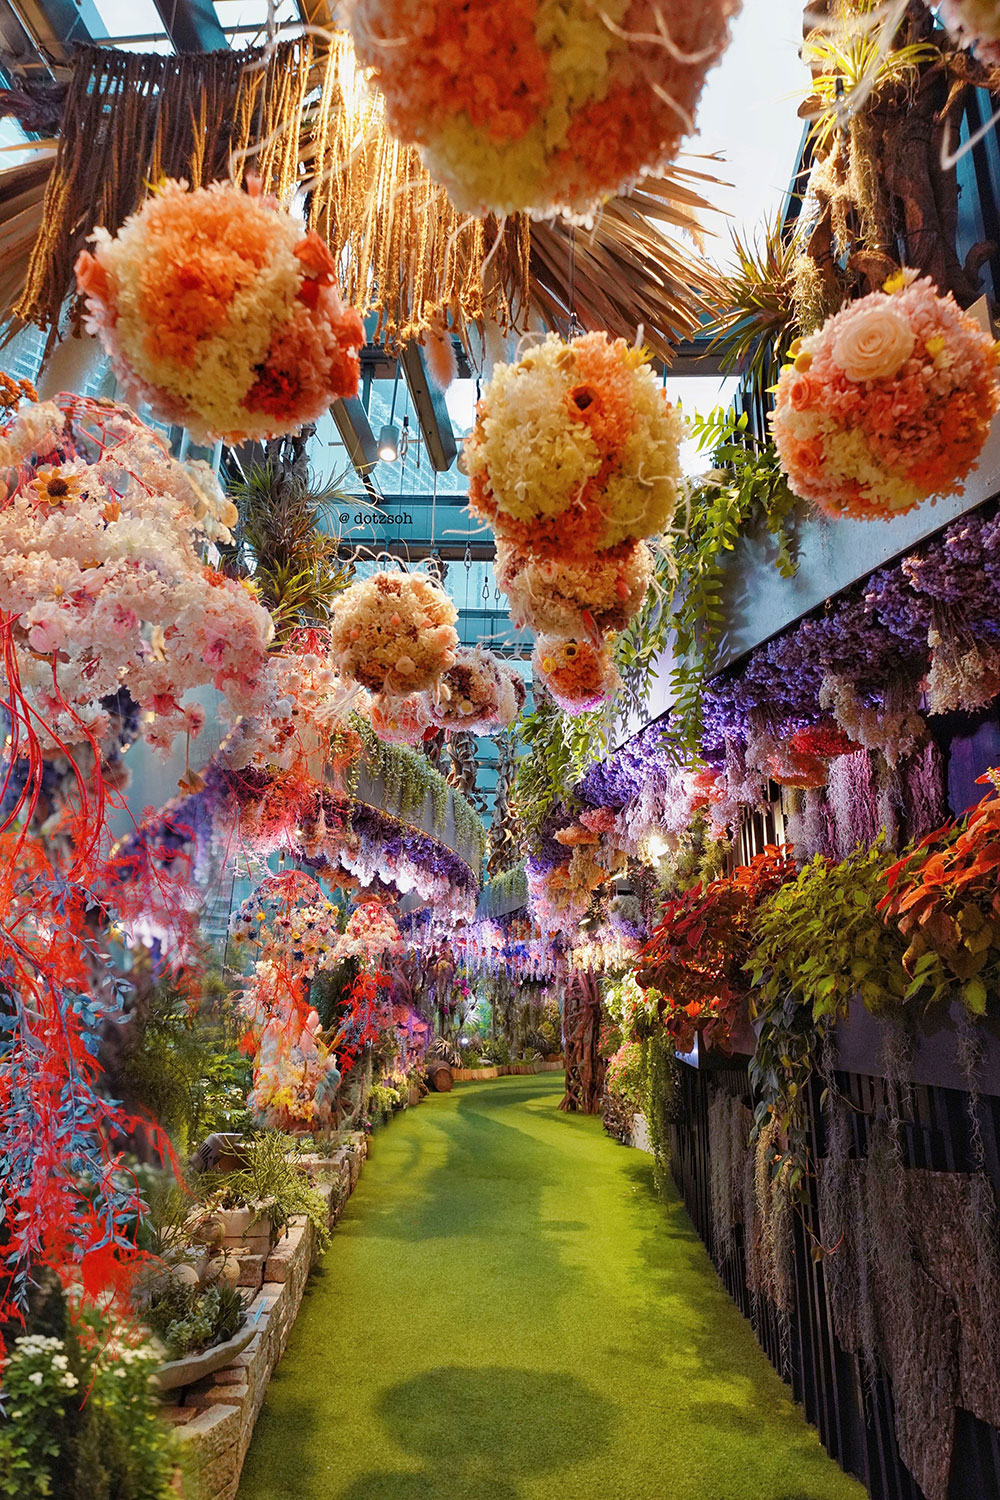 Floral Fantasy at Gardens by the Bay